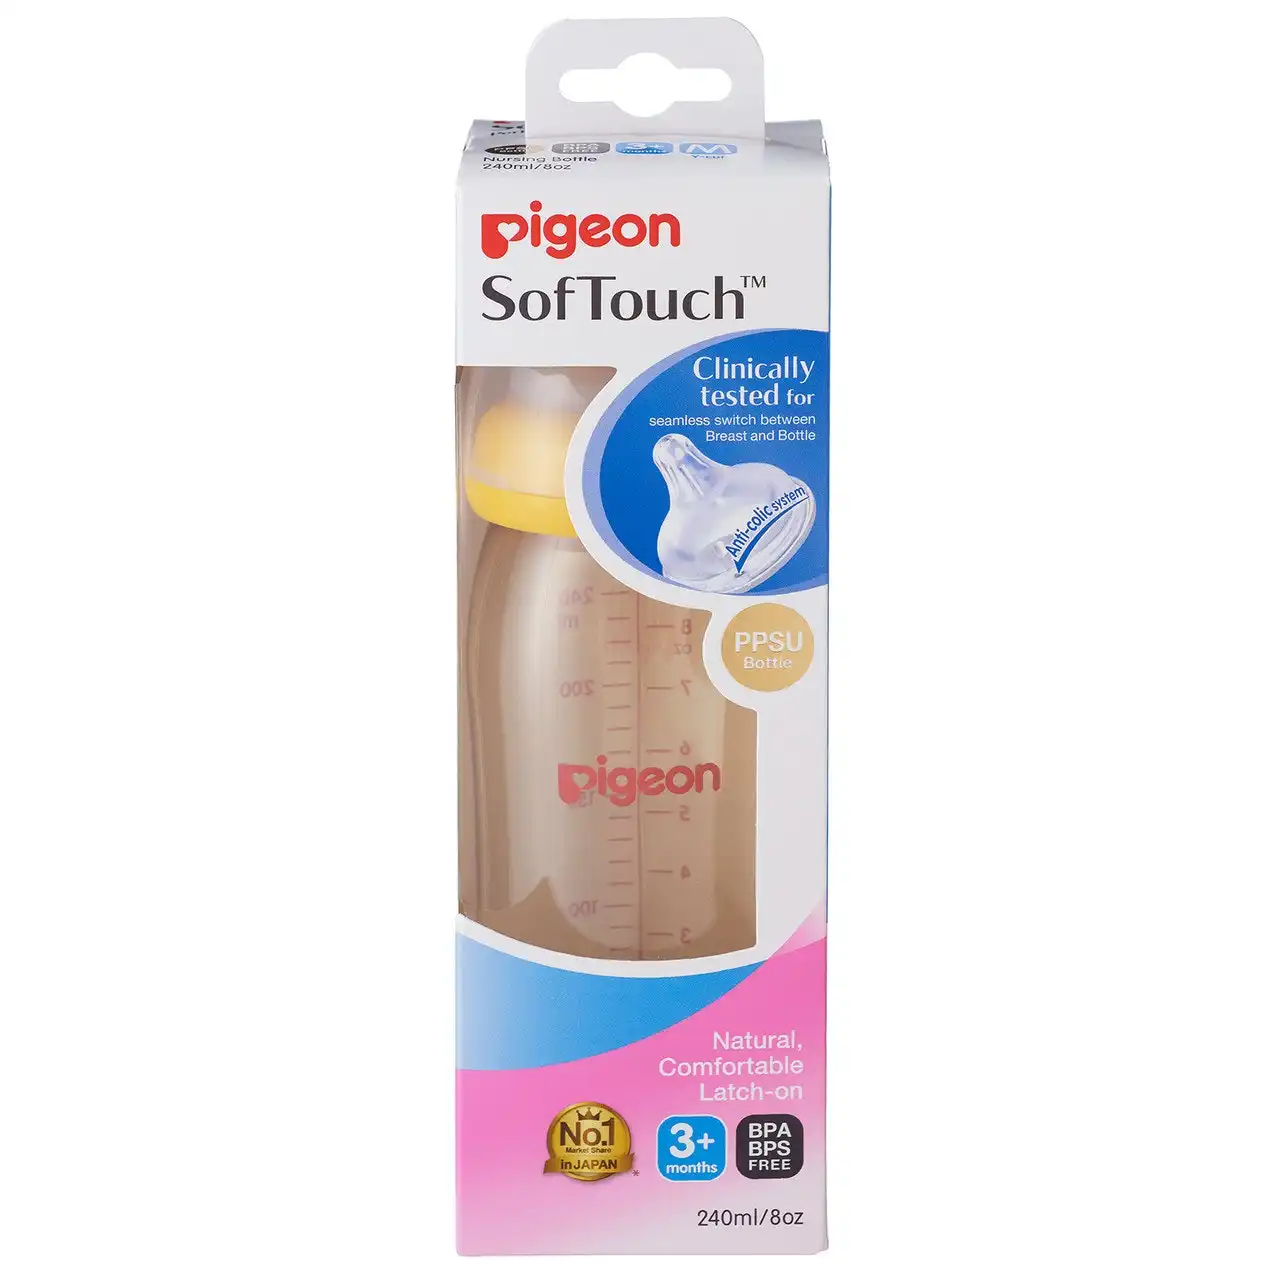 PIGEON Softouch Bottle PPSU 240ml